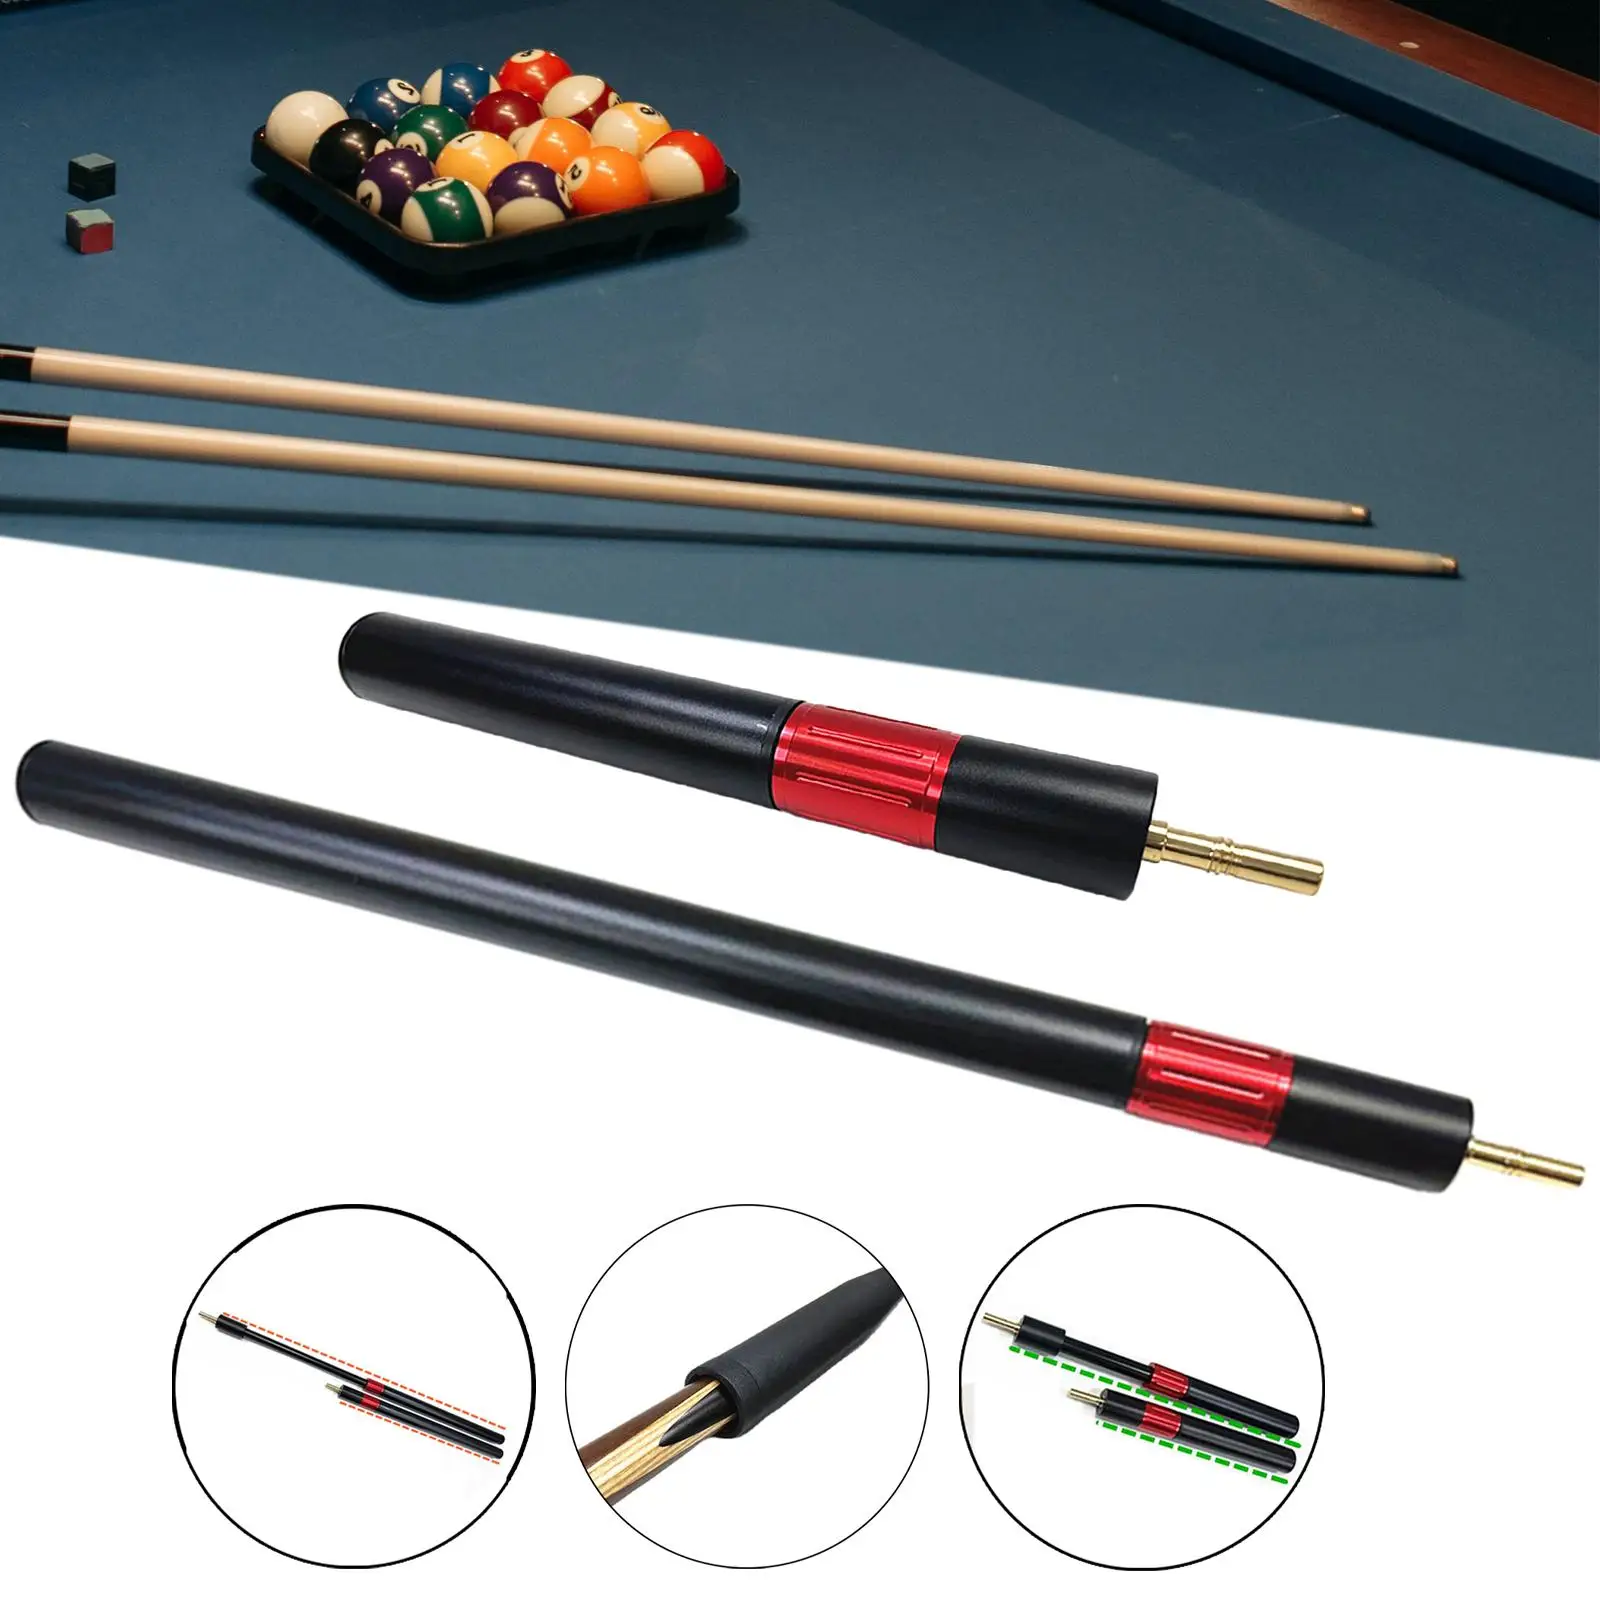 Billiards Cue Extension Attachment, Telescopic Pool Cue Extension Rod End Lengthener